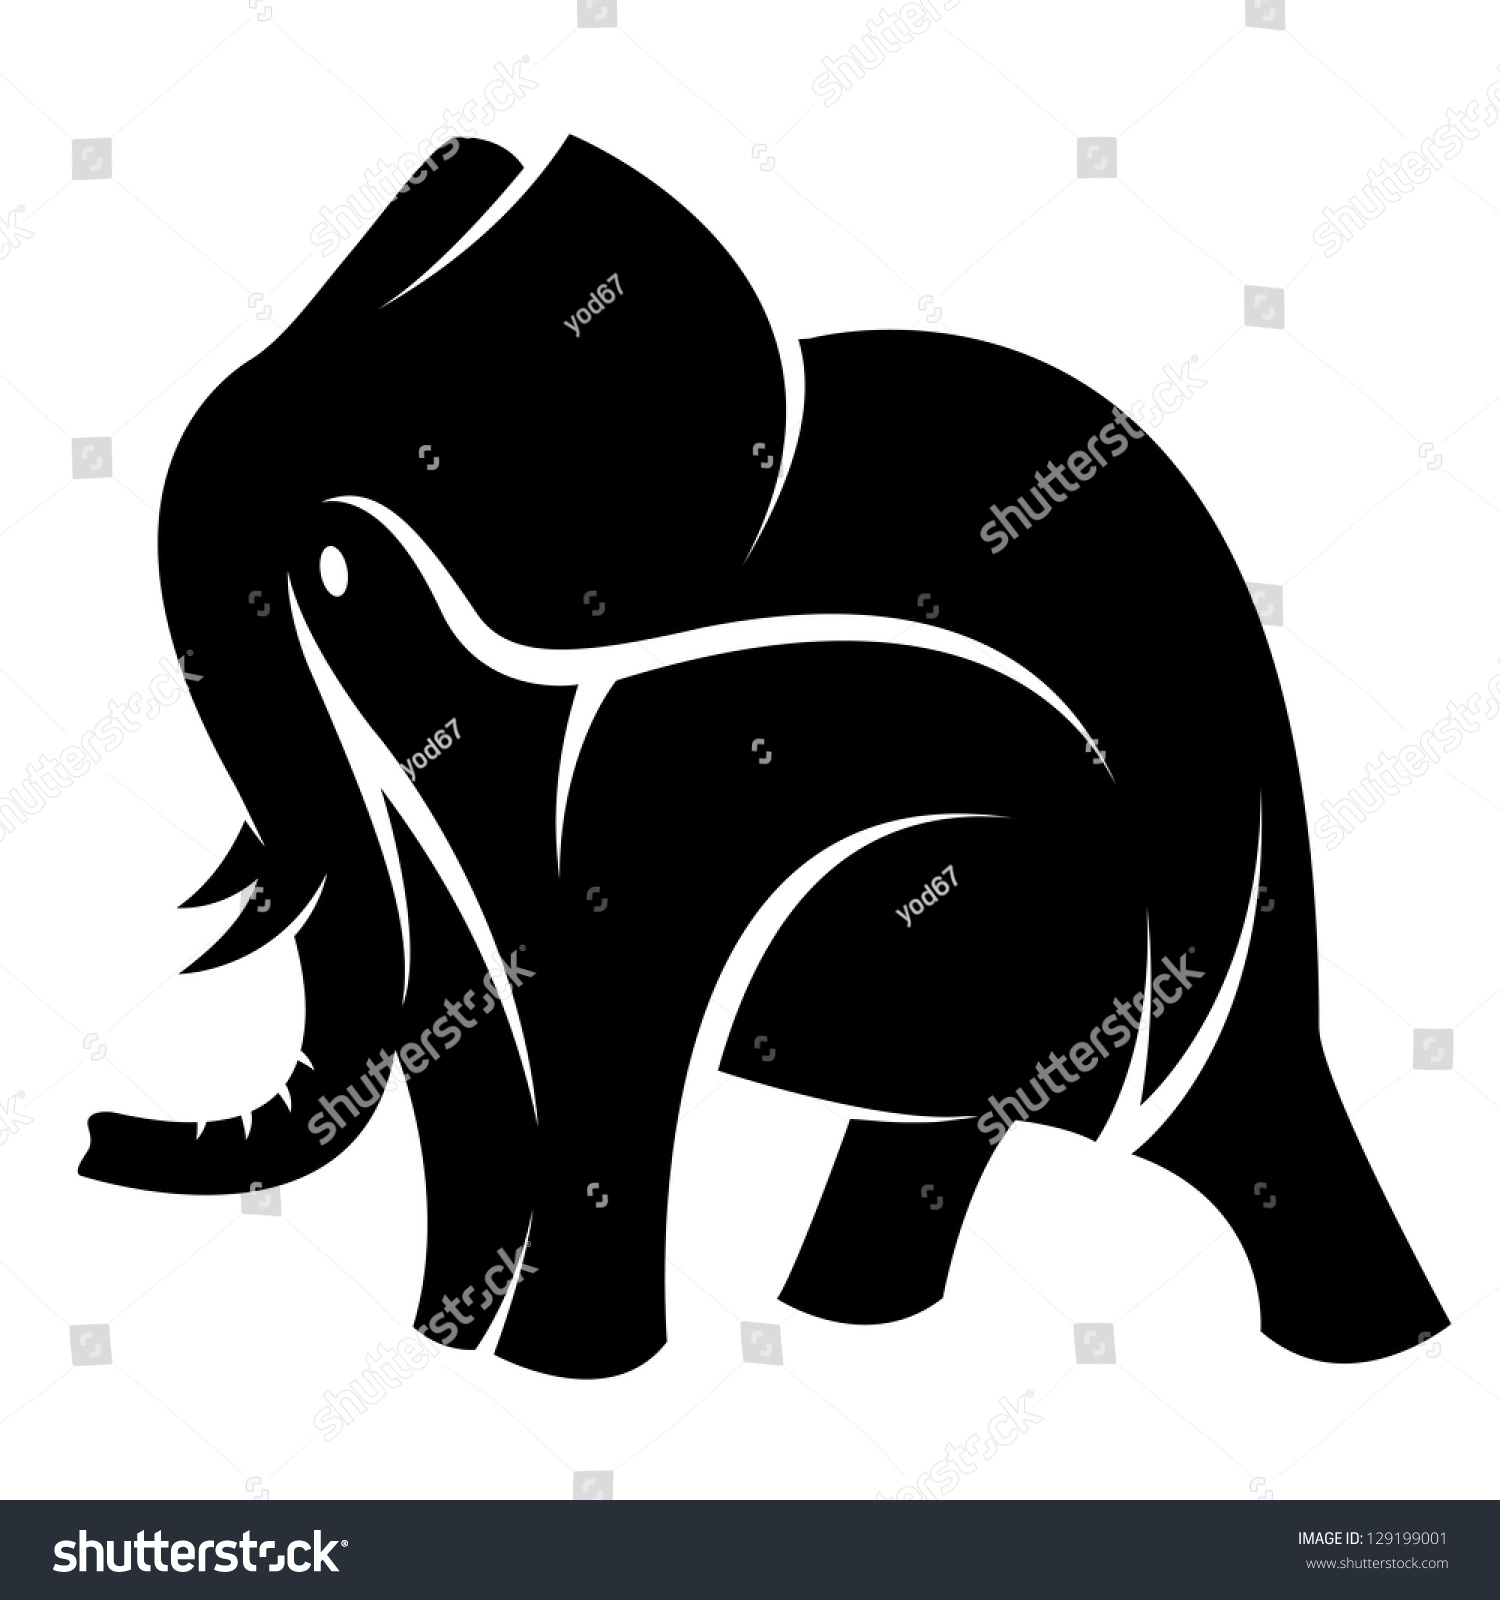 Vector Image Elephant On White Background Stock Vector 129199001